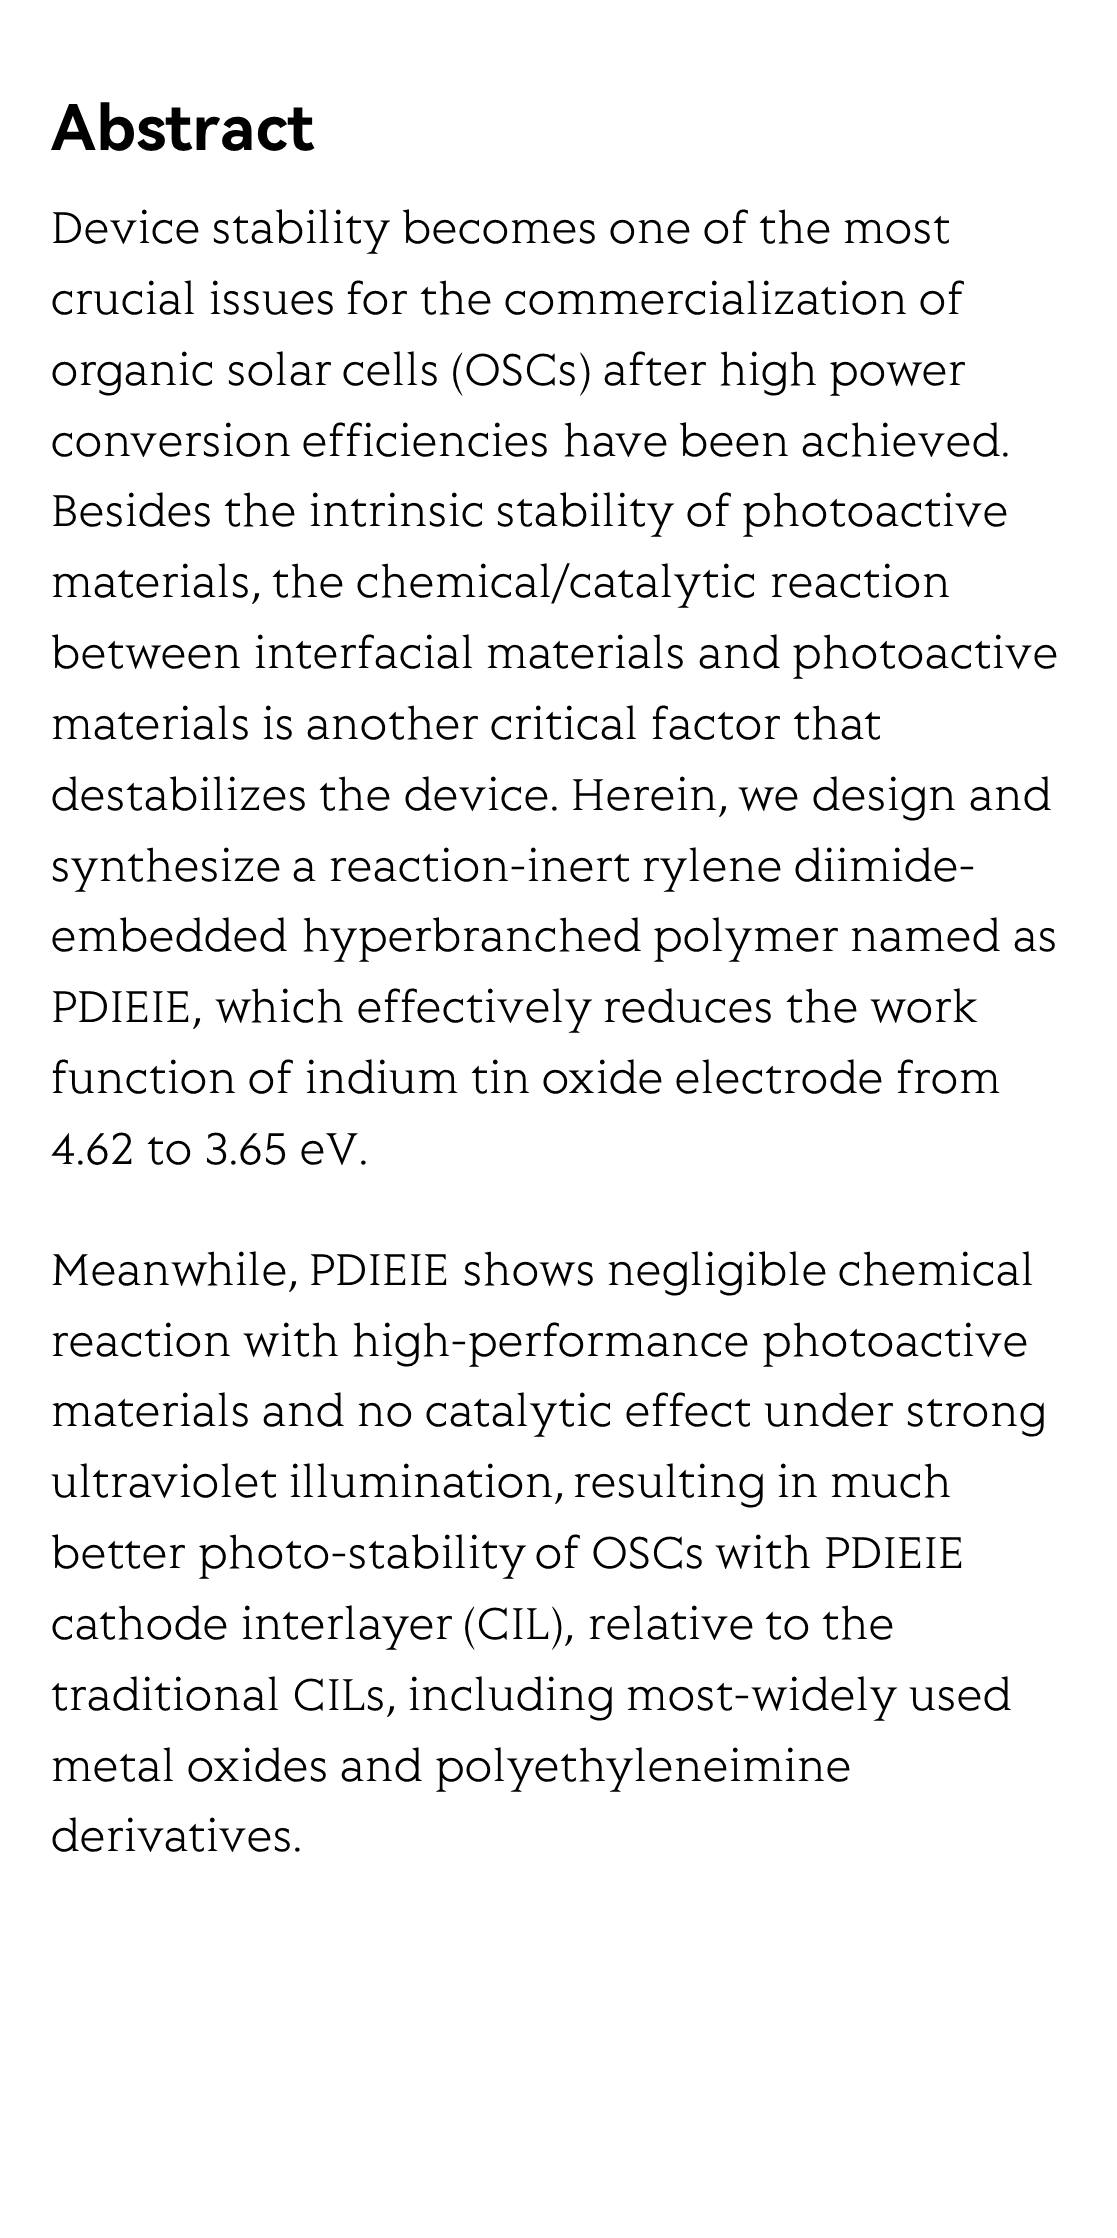 Intrinsically inert hyperbranched interlayer for enhanced stability of organic solar cells_2